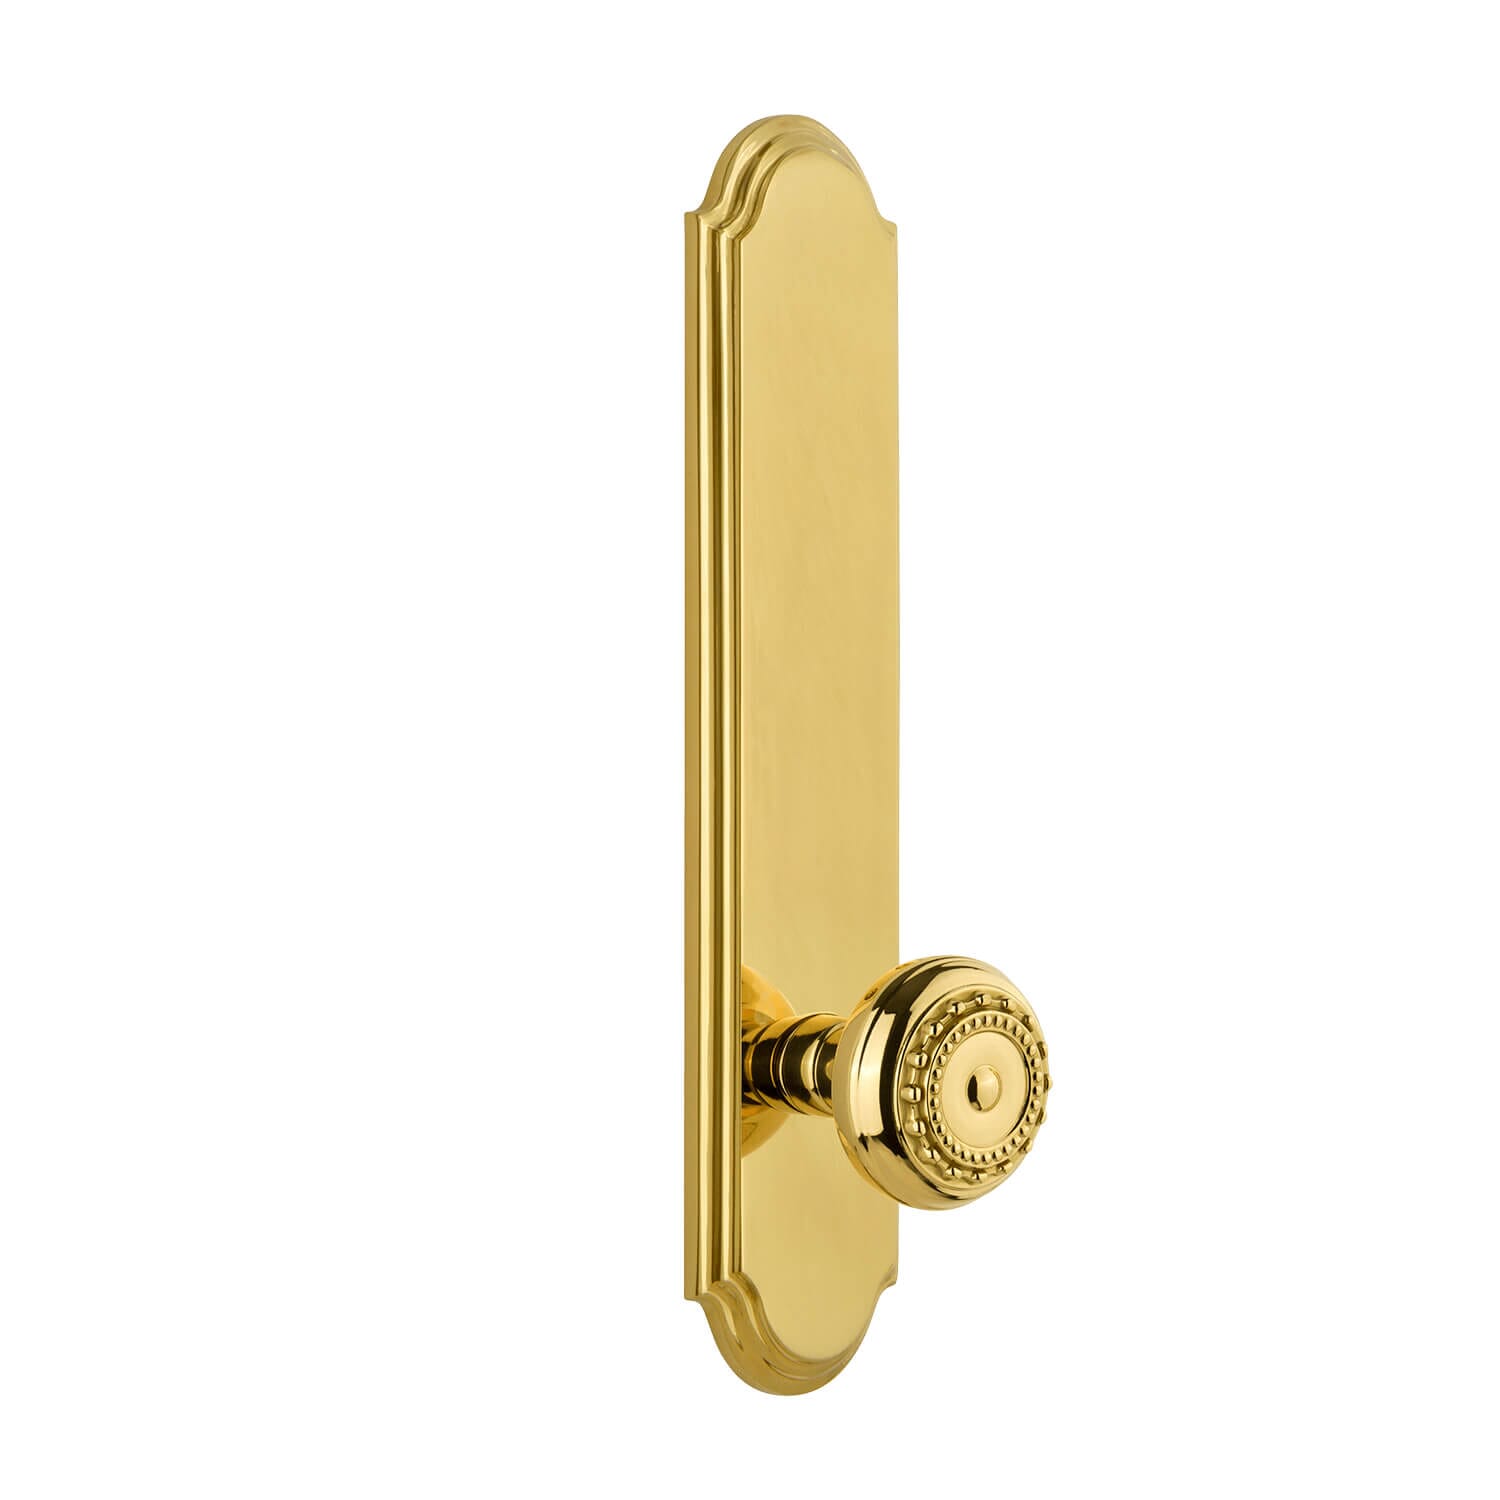 Arc Tall Plate with Parthenon Knob in Lifetime Brass - Grandeur Hardware